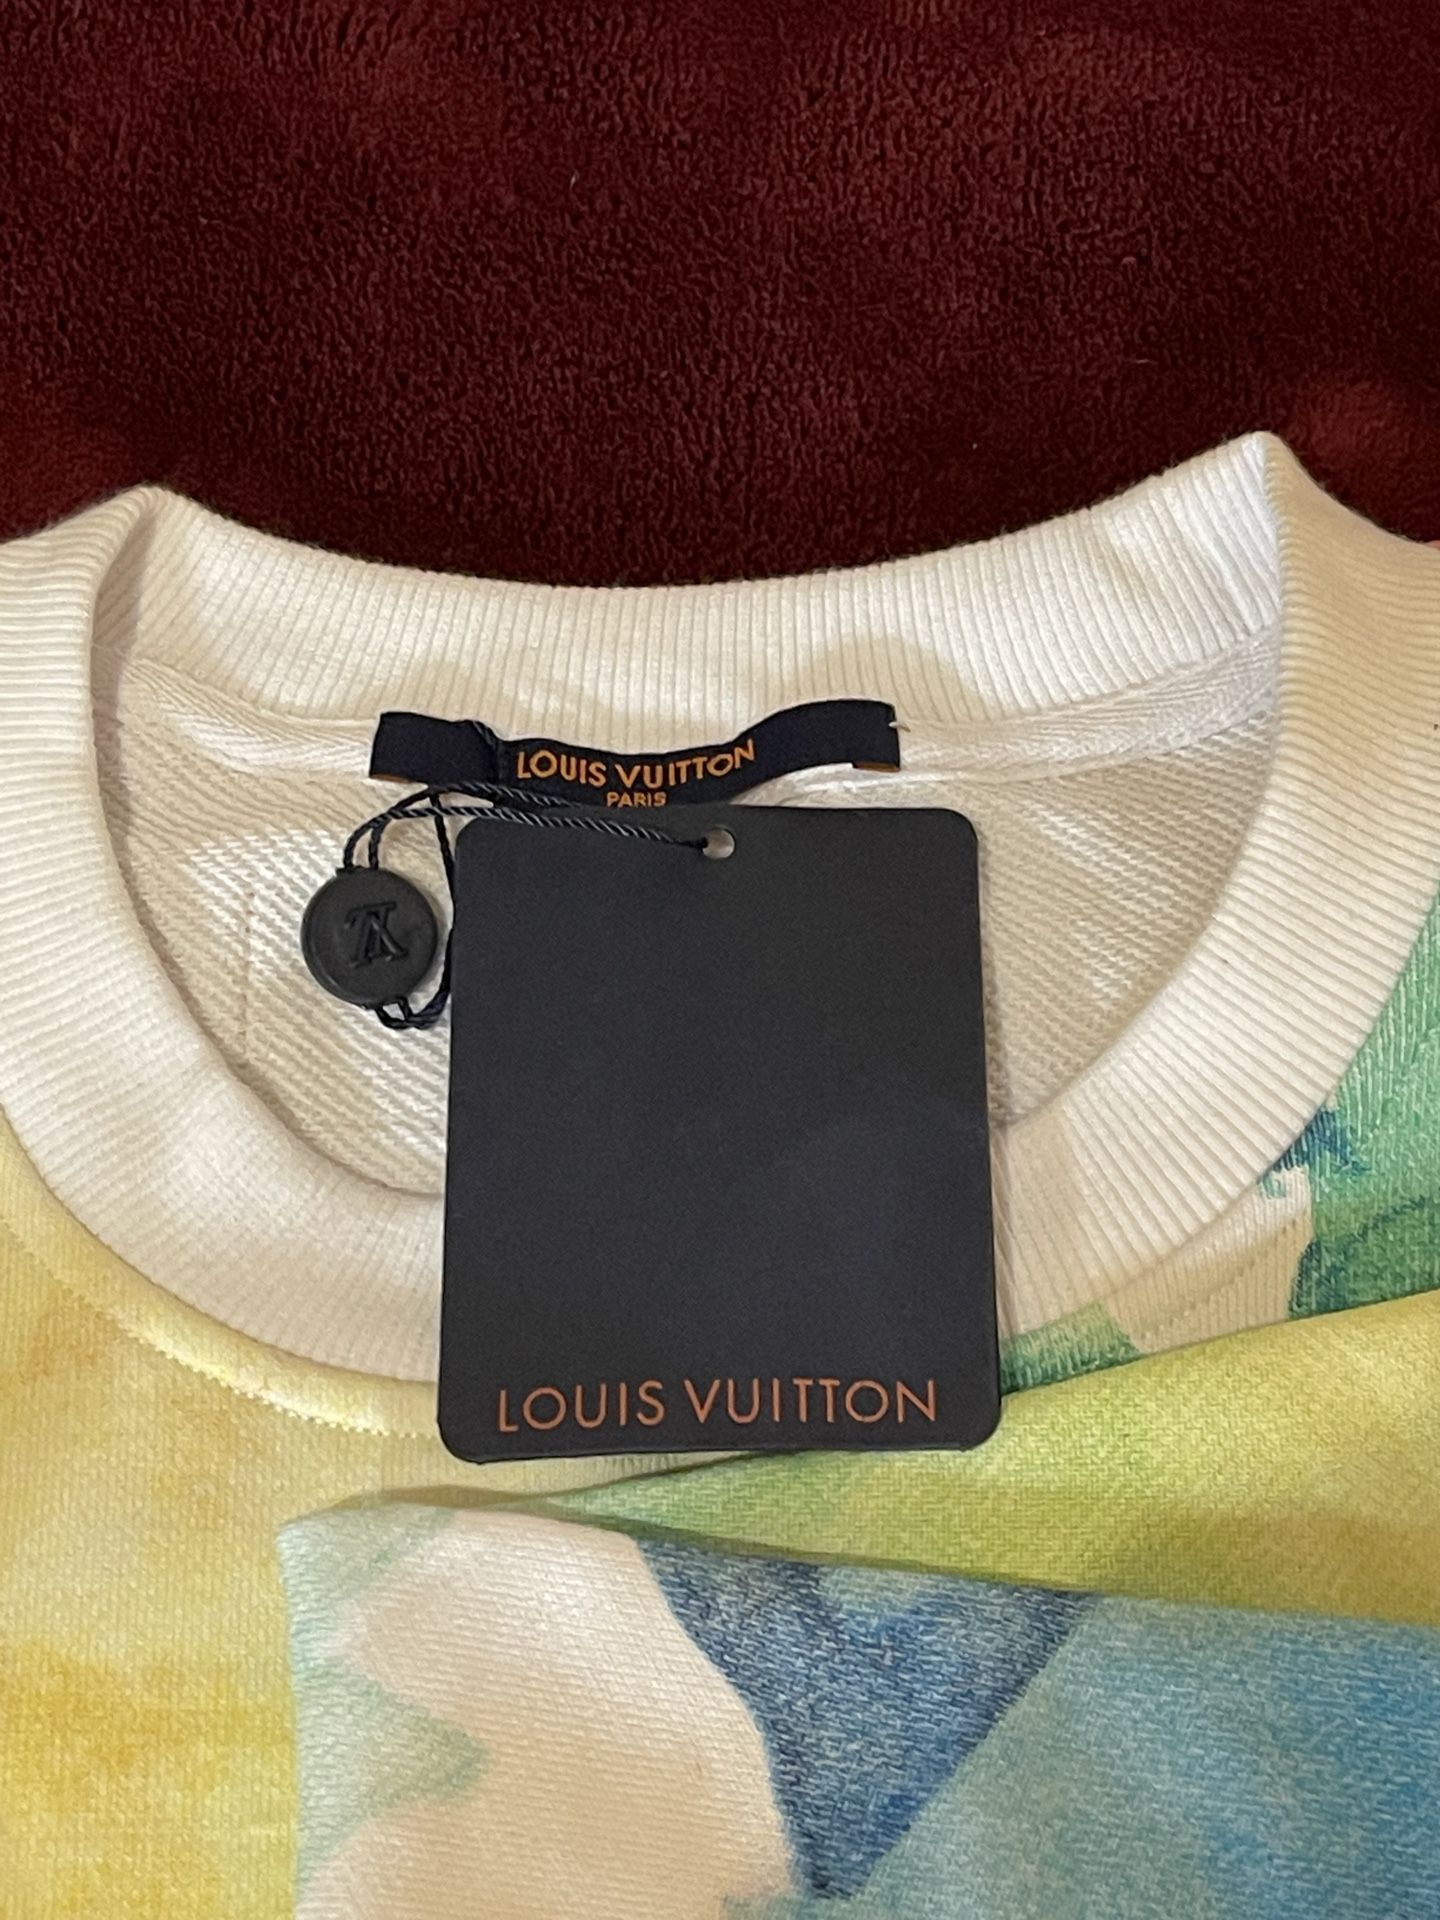 Louis Vuitton Reversible Monogram Track Top Sweater for Sale in Las Vegas,  NV - OfferUp